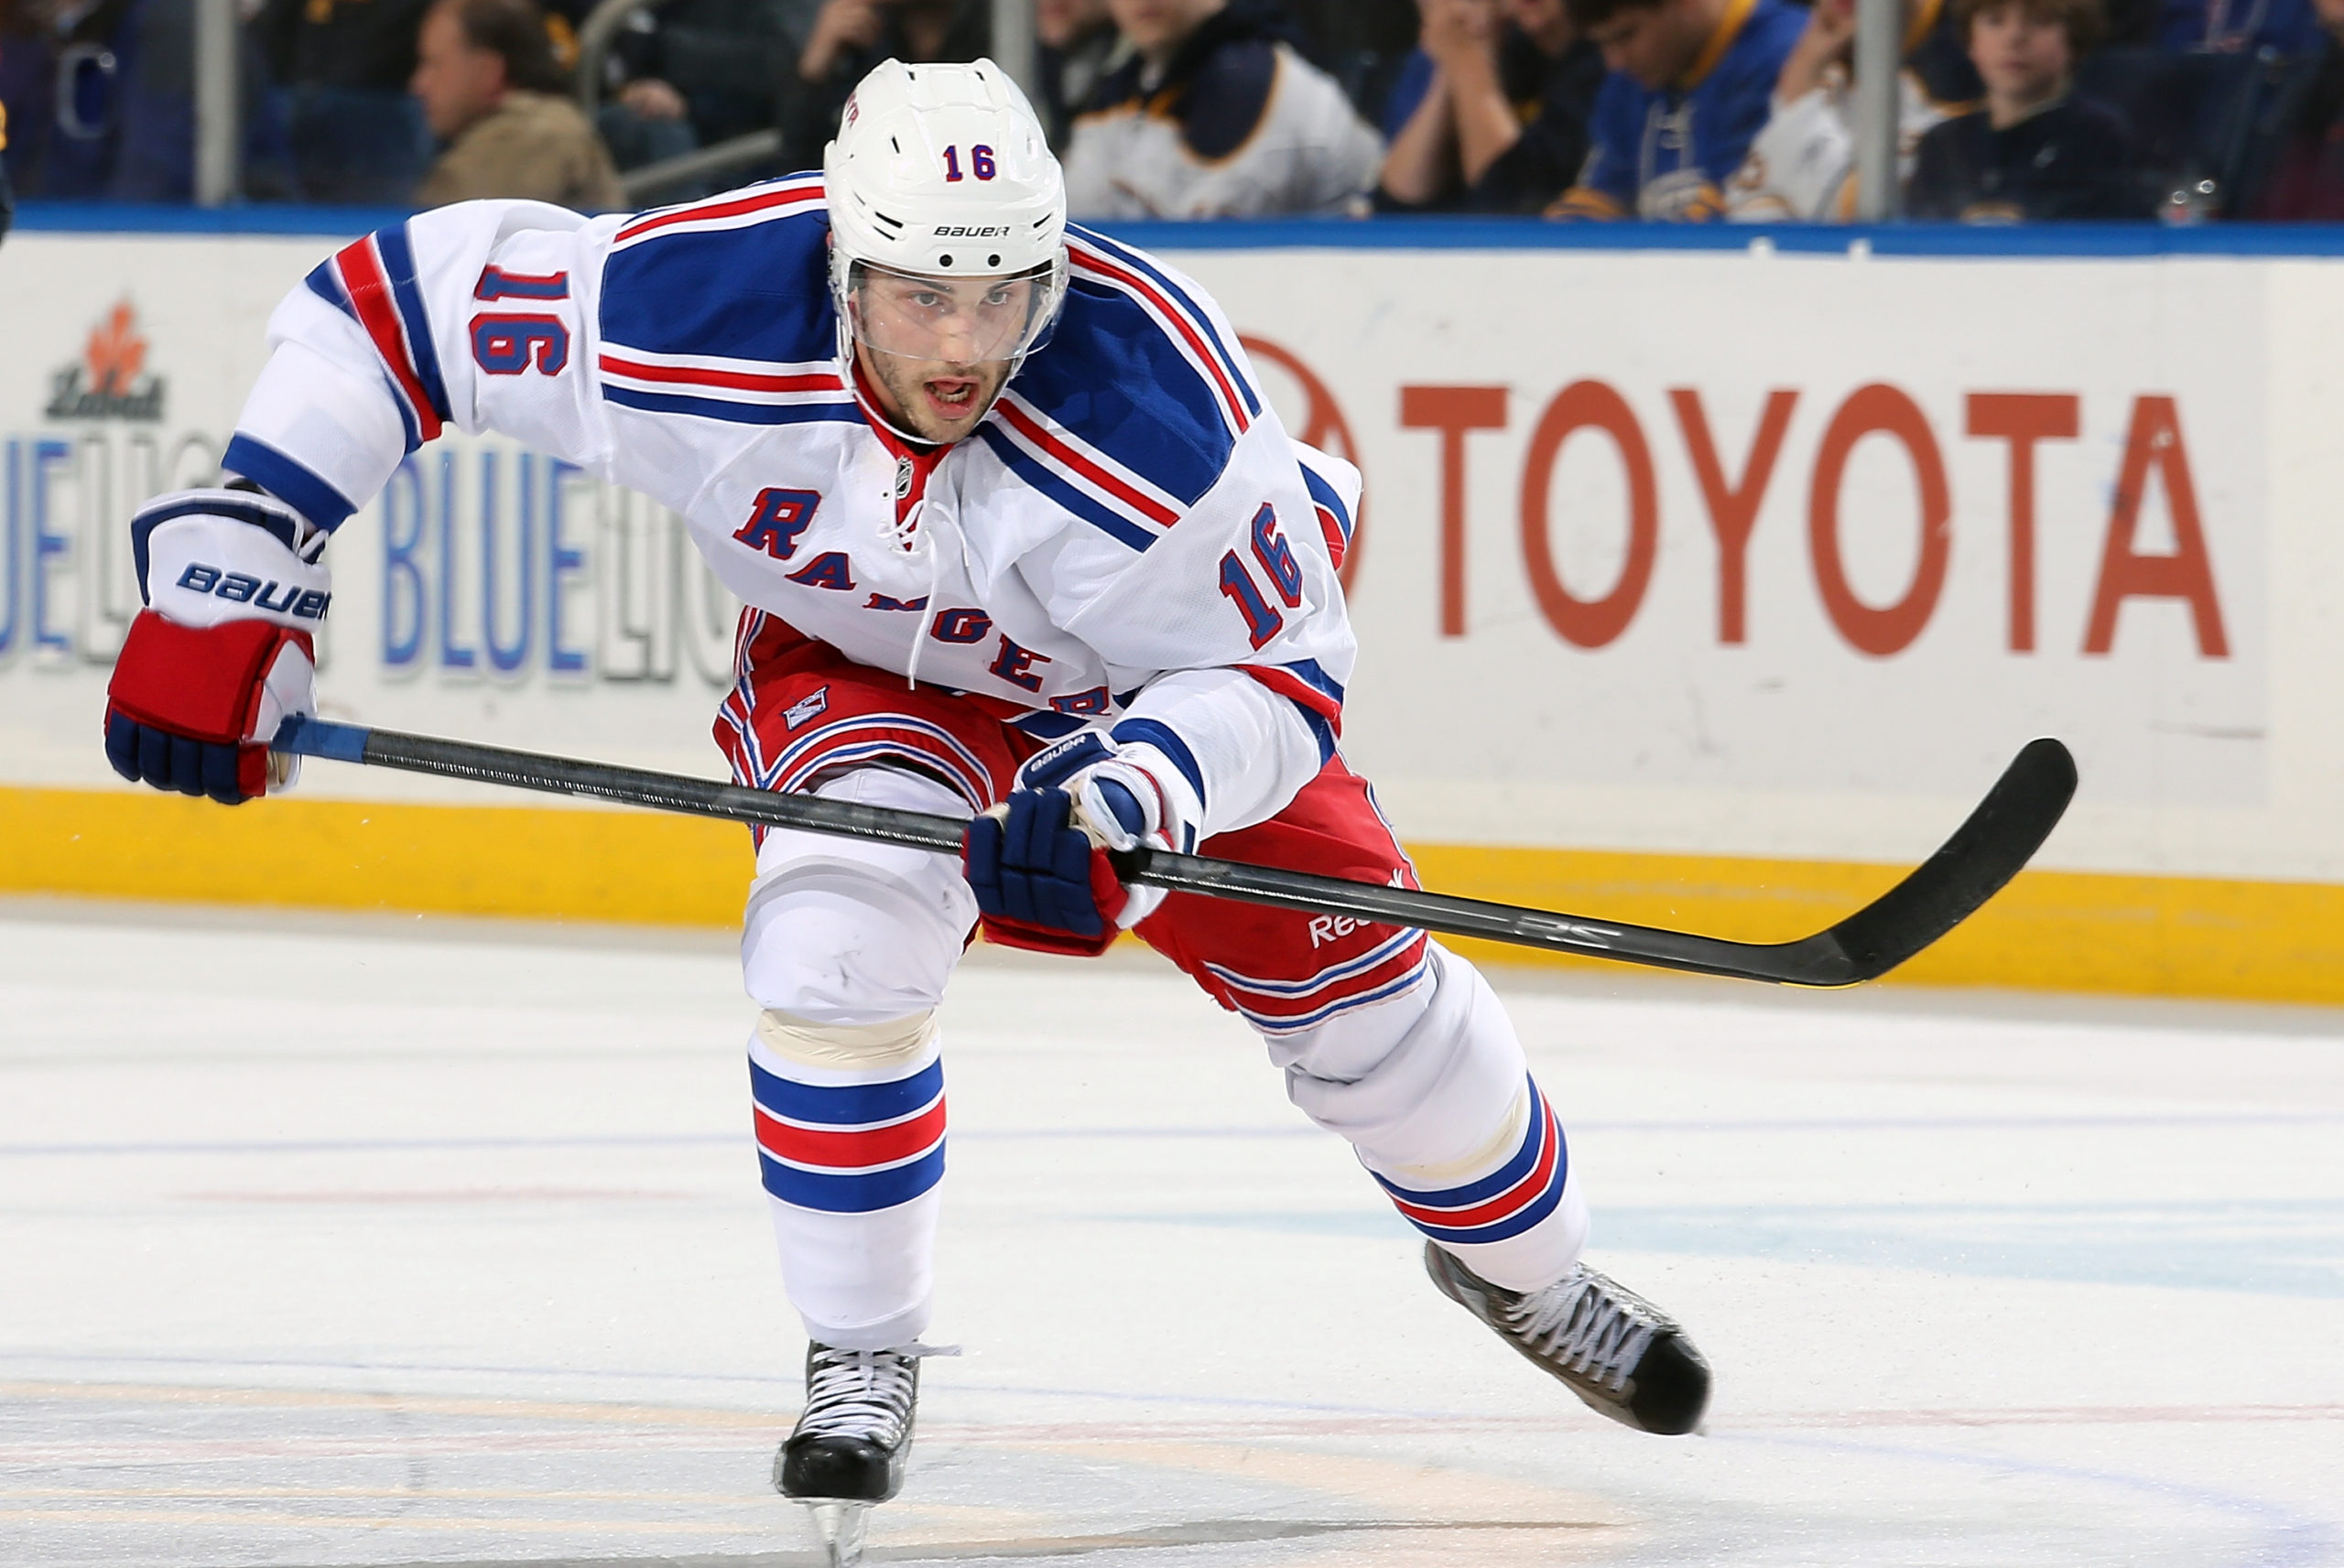 Arizona Coyotes sign experienced forward Derick Brassard to 1-year contract